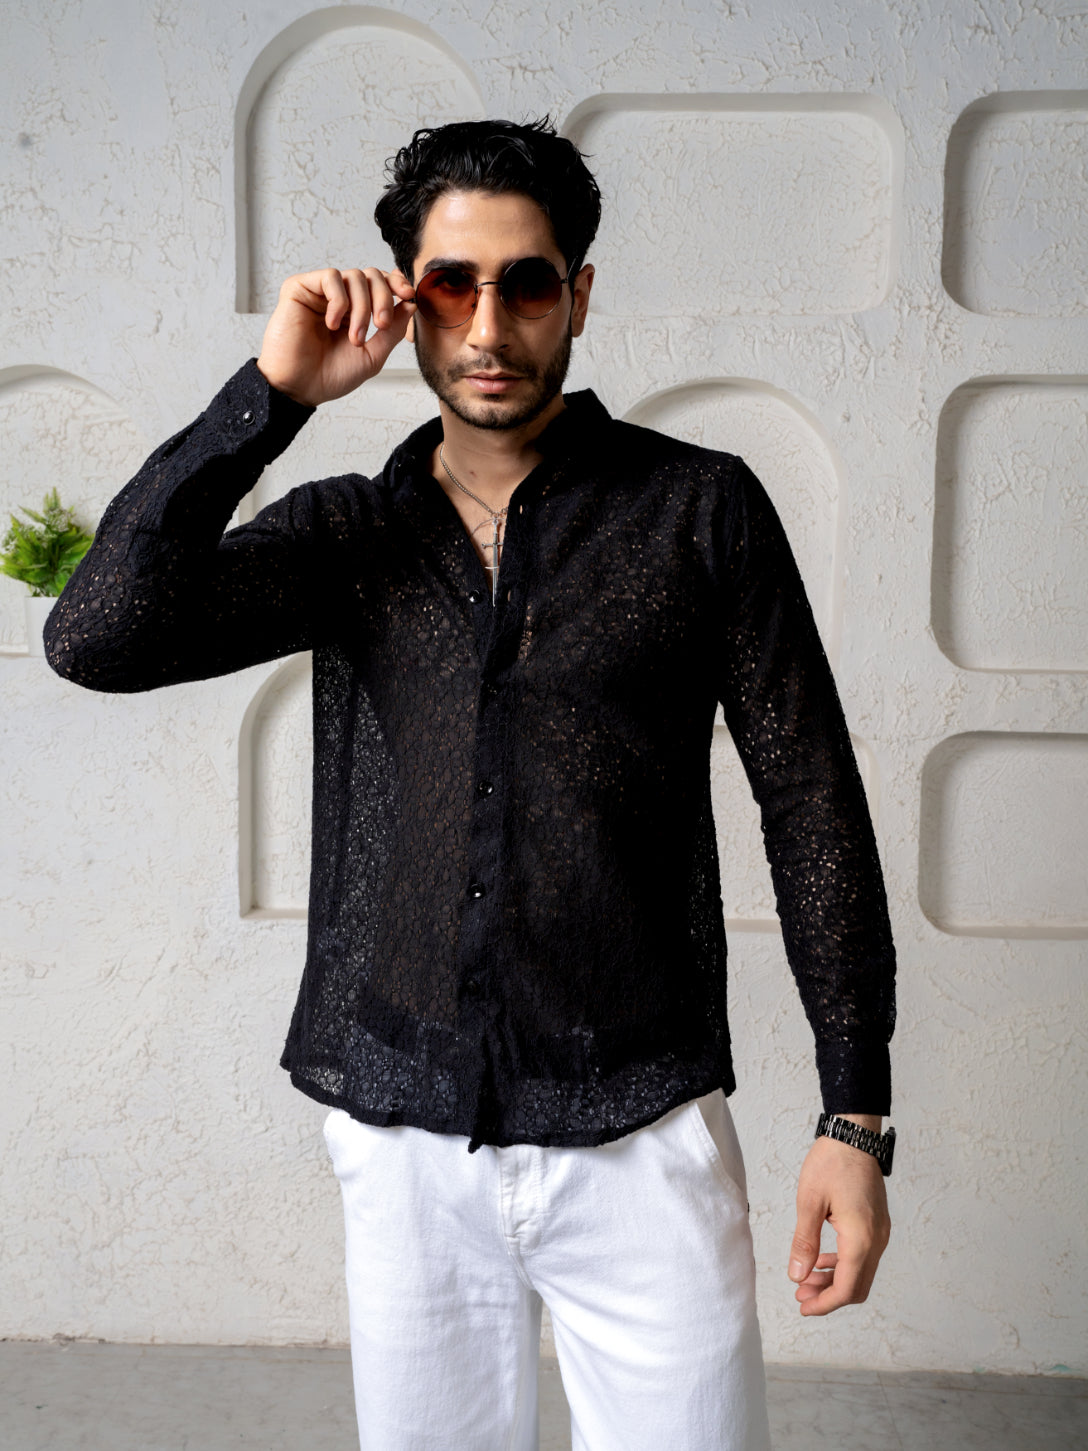 Crochet Cotton Black Floral Lace Shirt For Men - Full Sleeves(Take One Size Bigger Than Your Usual Size)